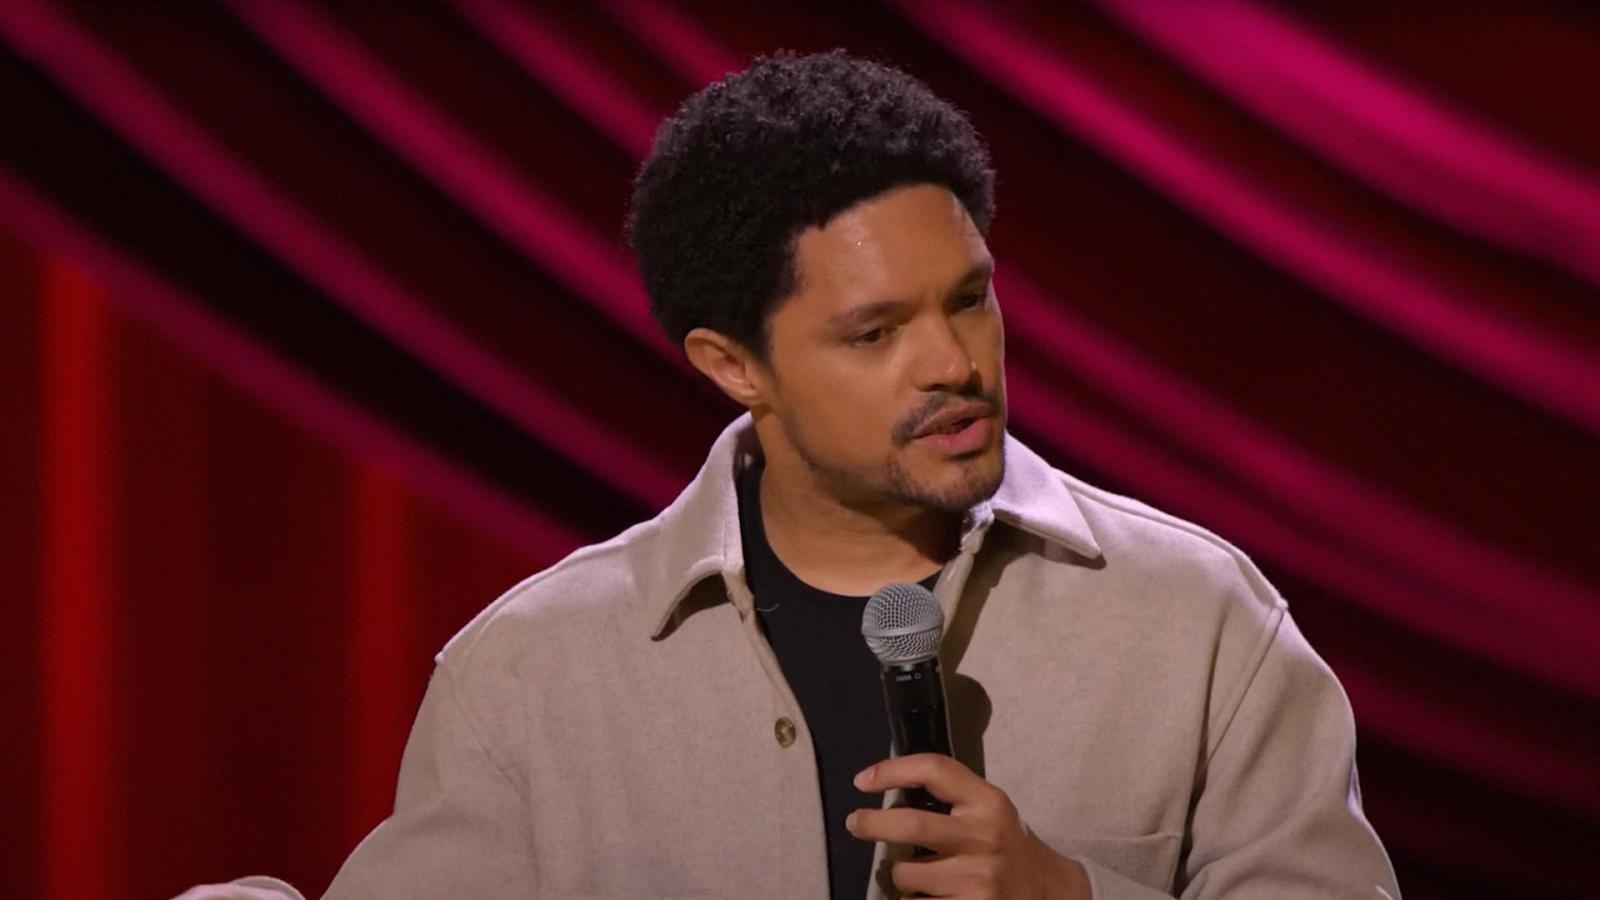 5 Funniest Netflix Comedy Specials That Will Make You Think About Life - image 2